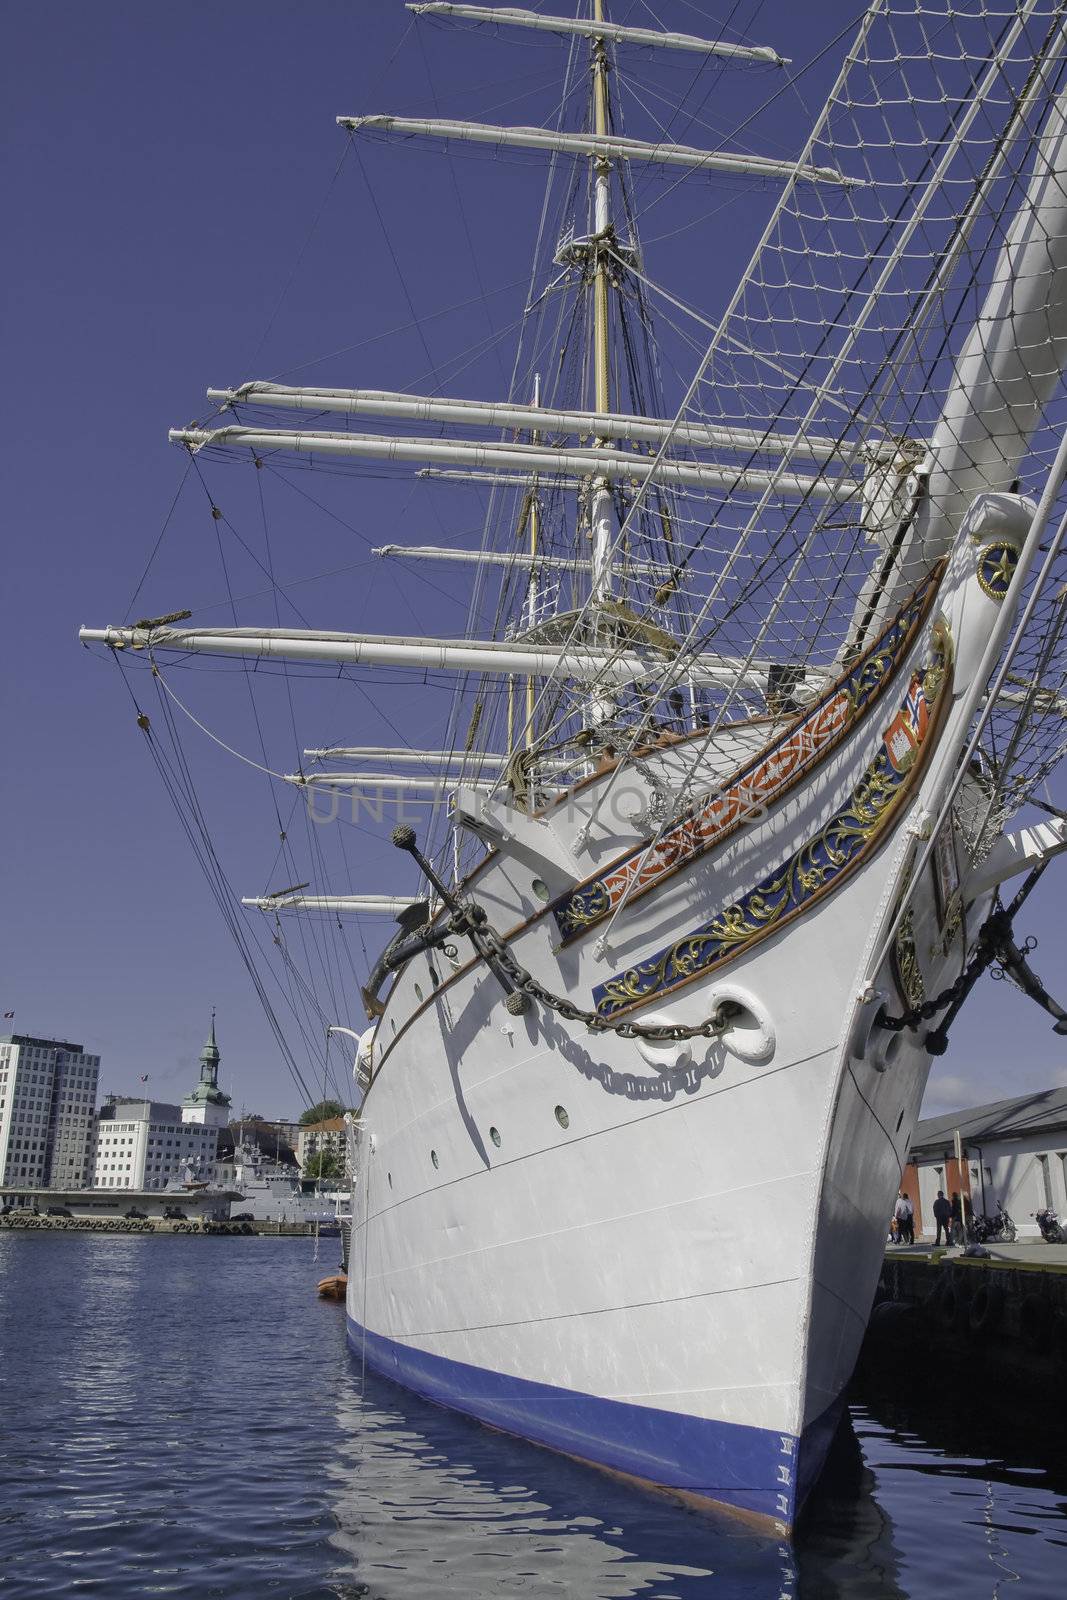 Statsraad Lehmkuhl, known from the BBC hit TV-series Onedin Line. The ship's home town is Bergen, Norway